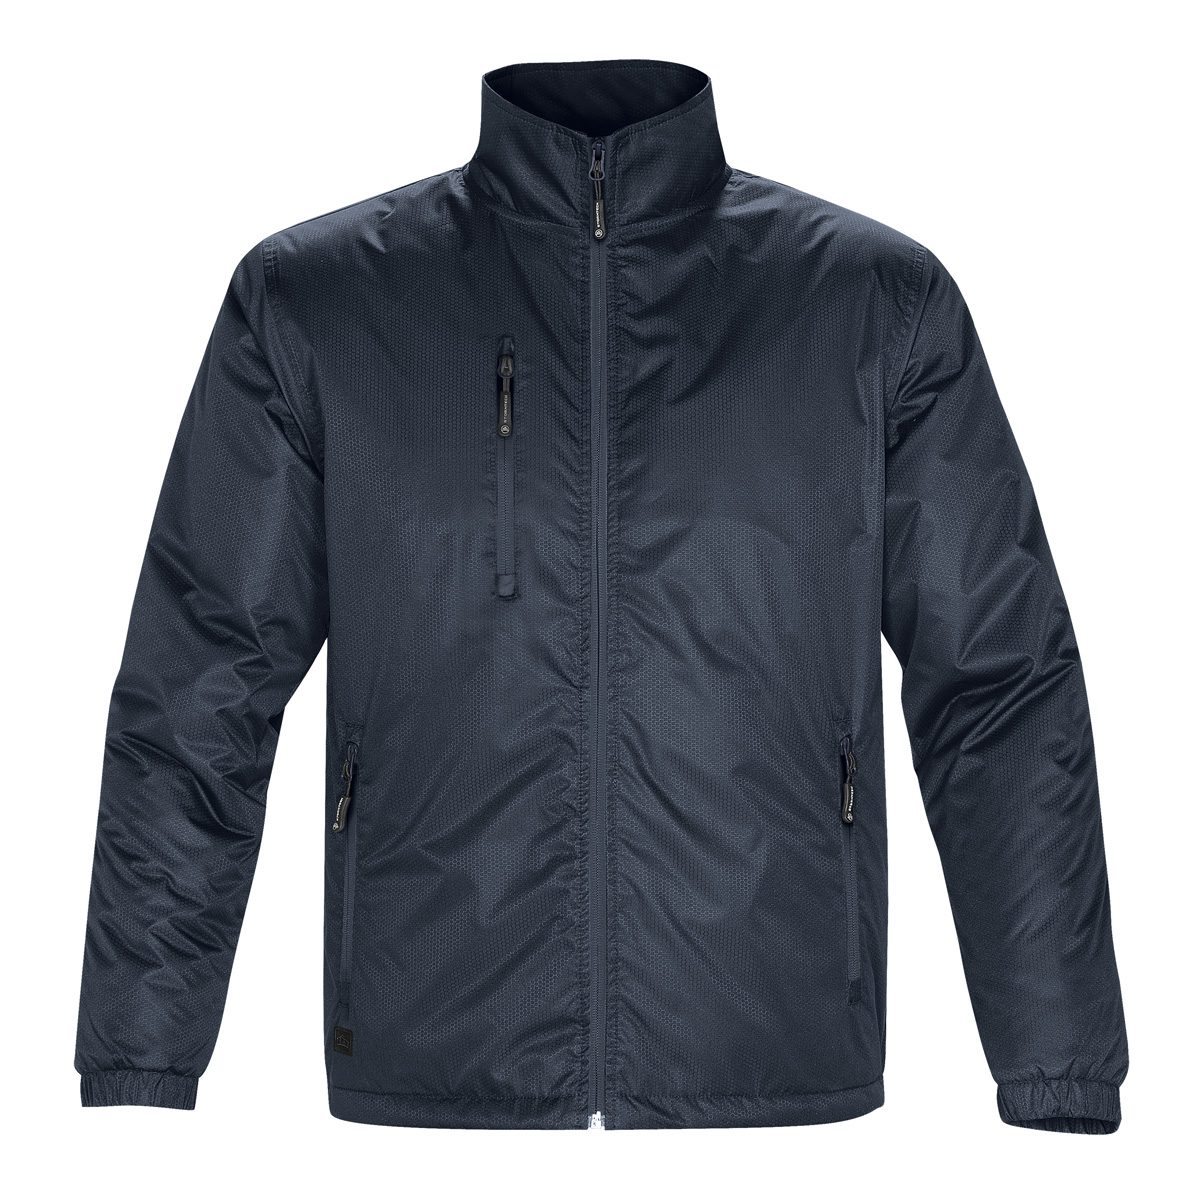 Stormtech Youth Axis Thermal Shell #GSX-2Y Black / Sundance Navy